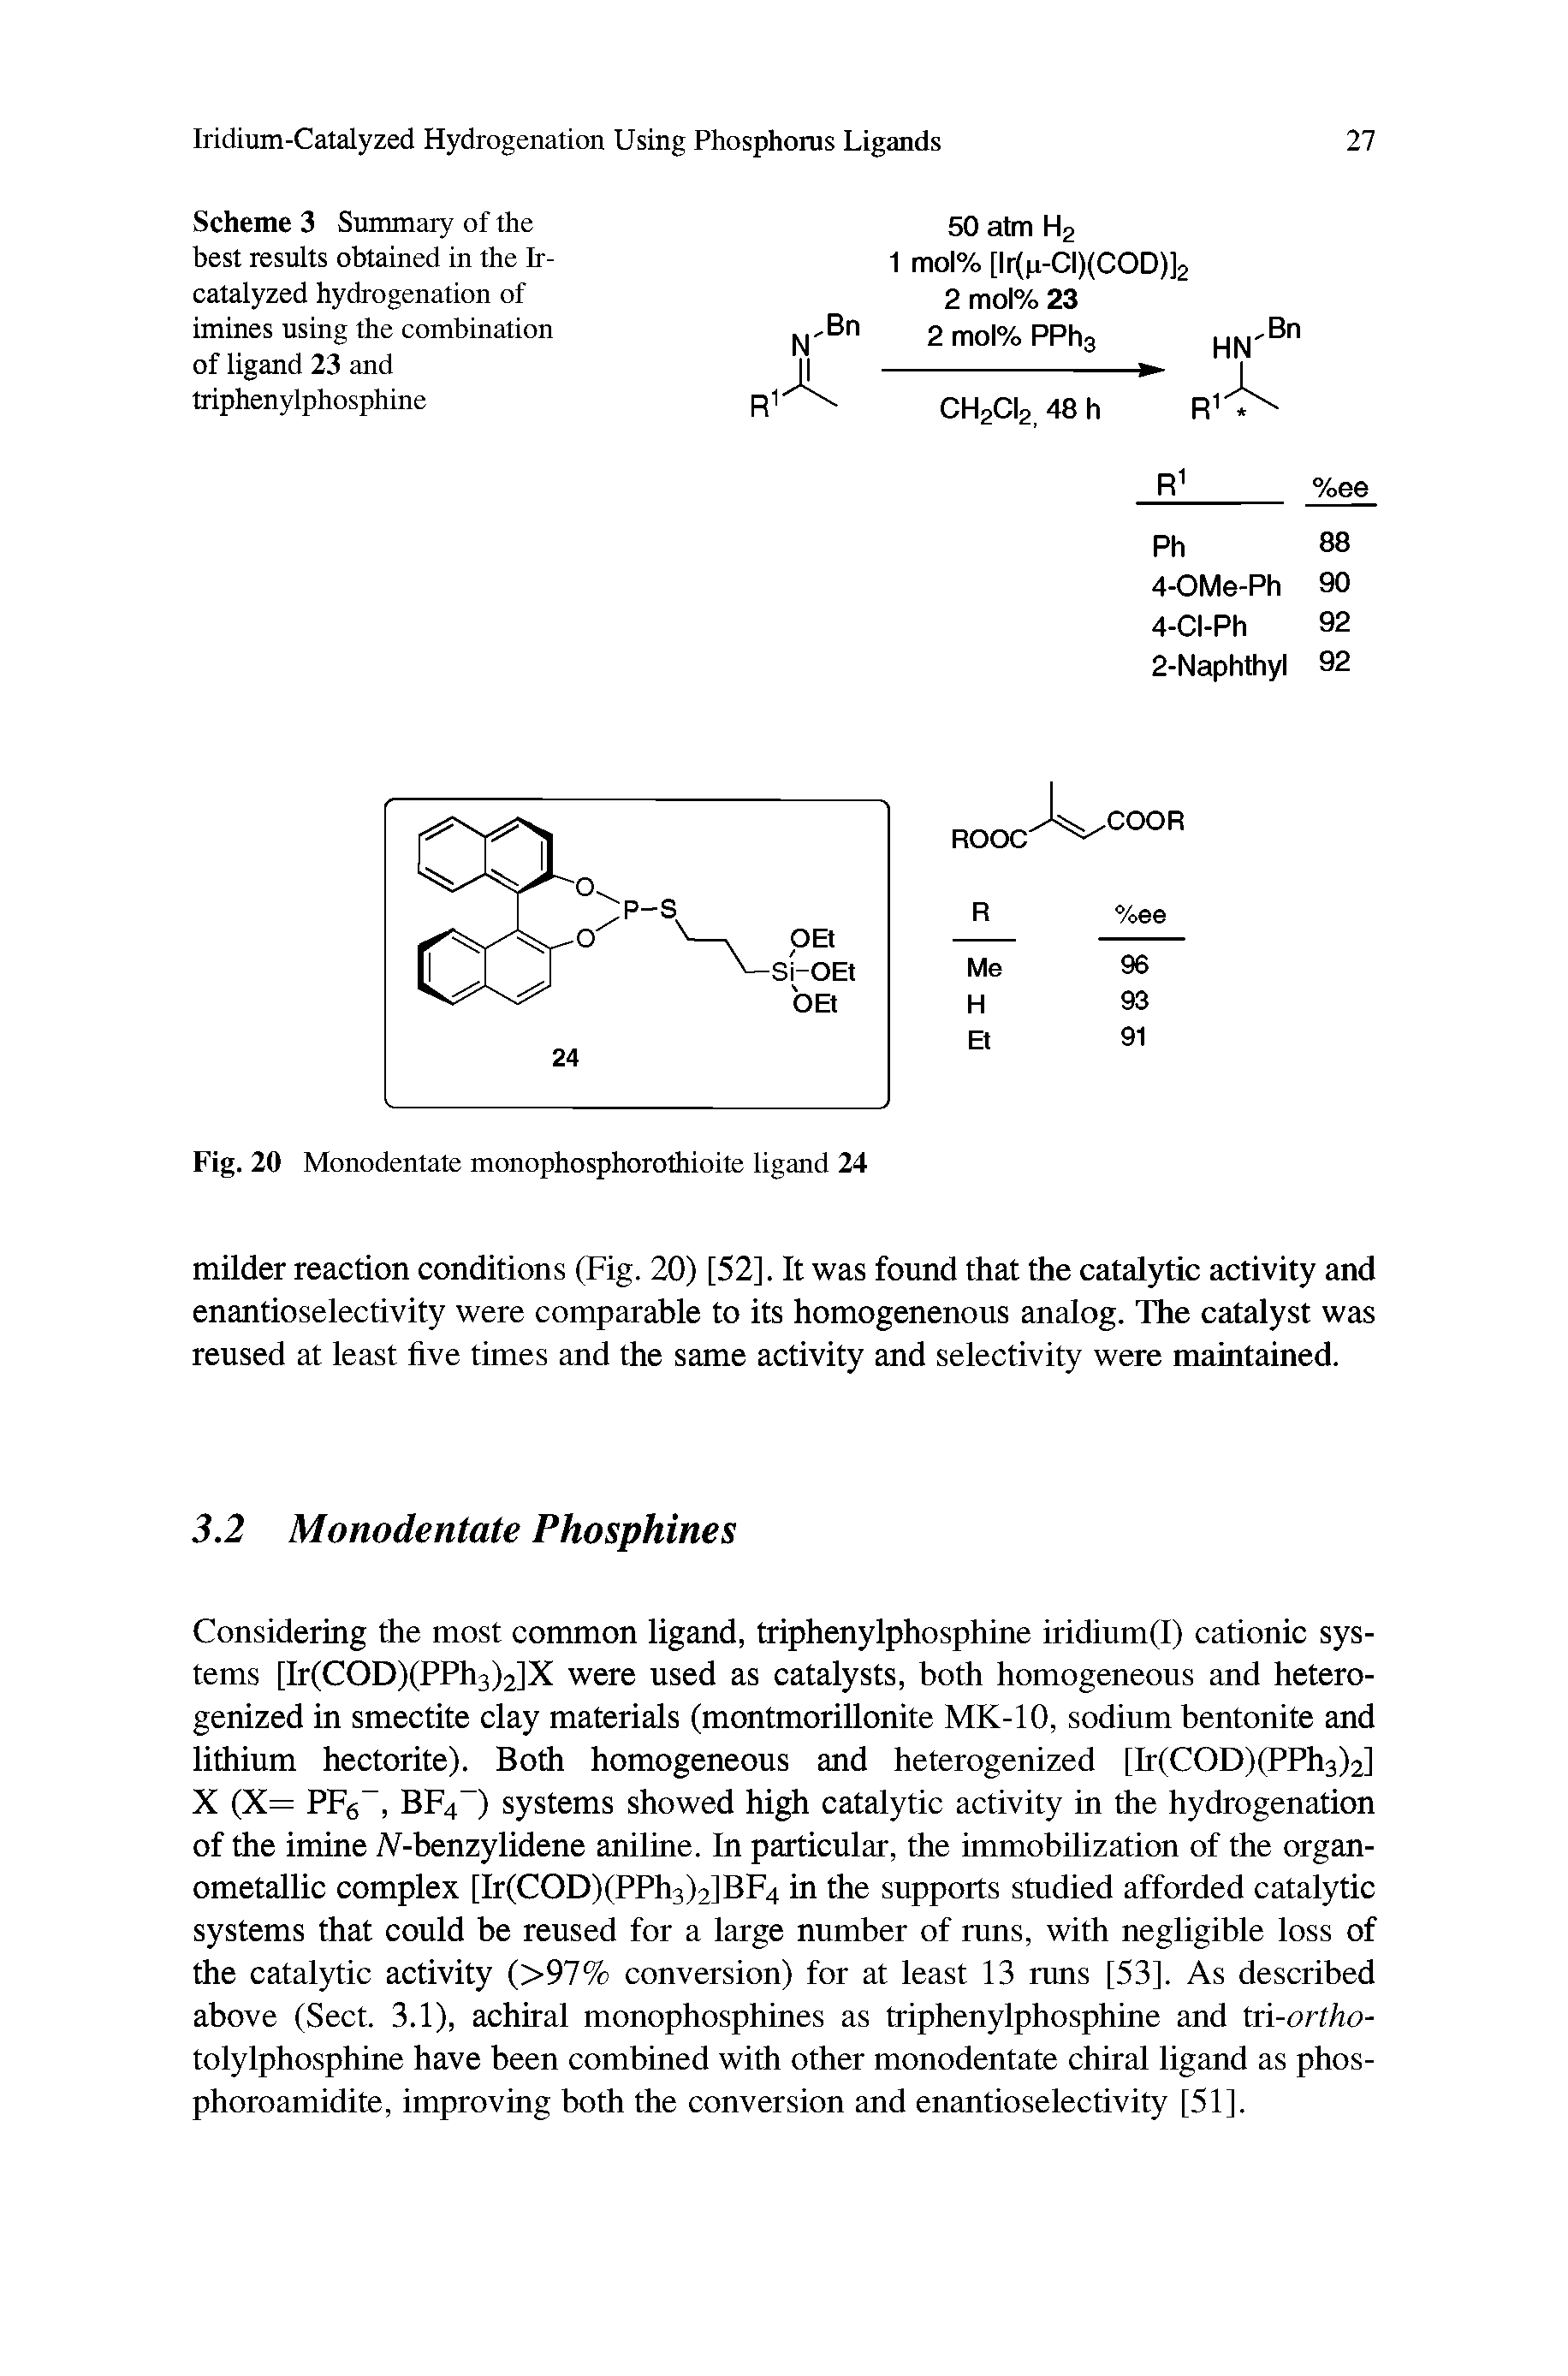 Scheme 3 Summary of the best results obtained in the Ir-catalyzed hydrogenation of imines using the combination of ligand 23 and triphenylphosphine...